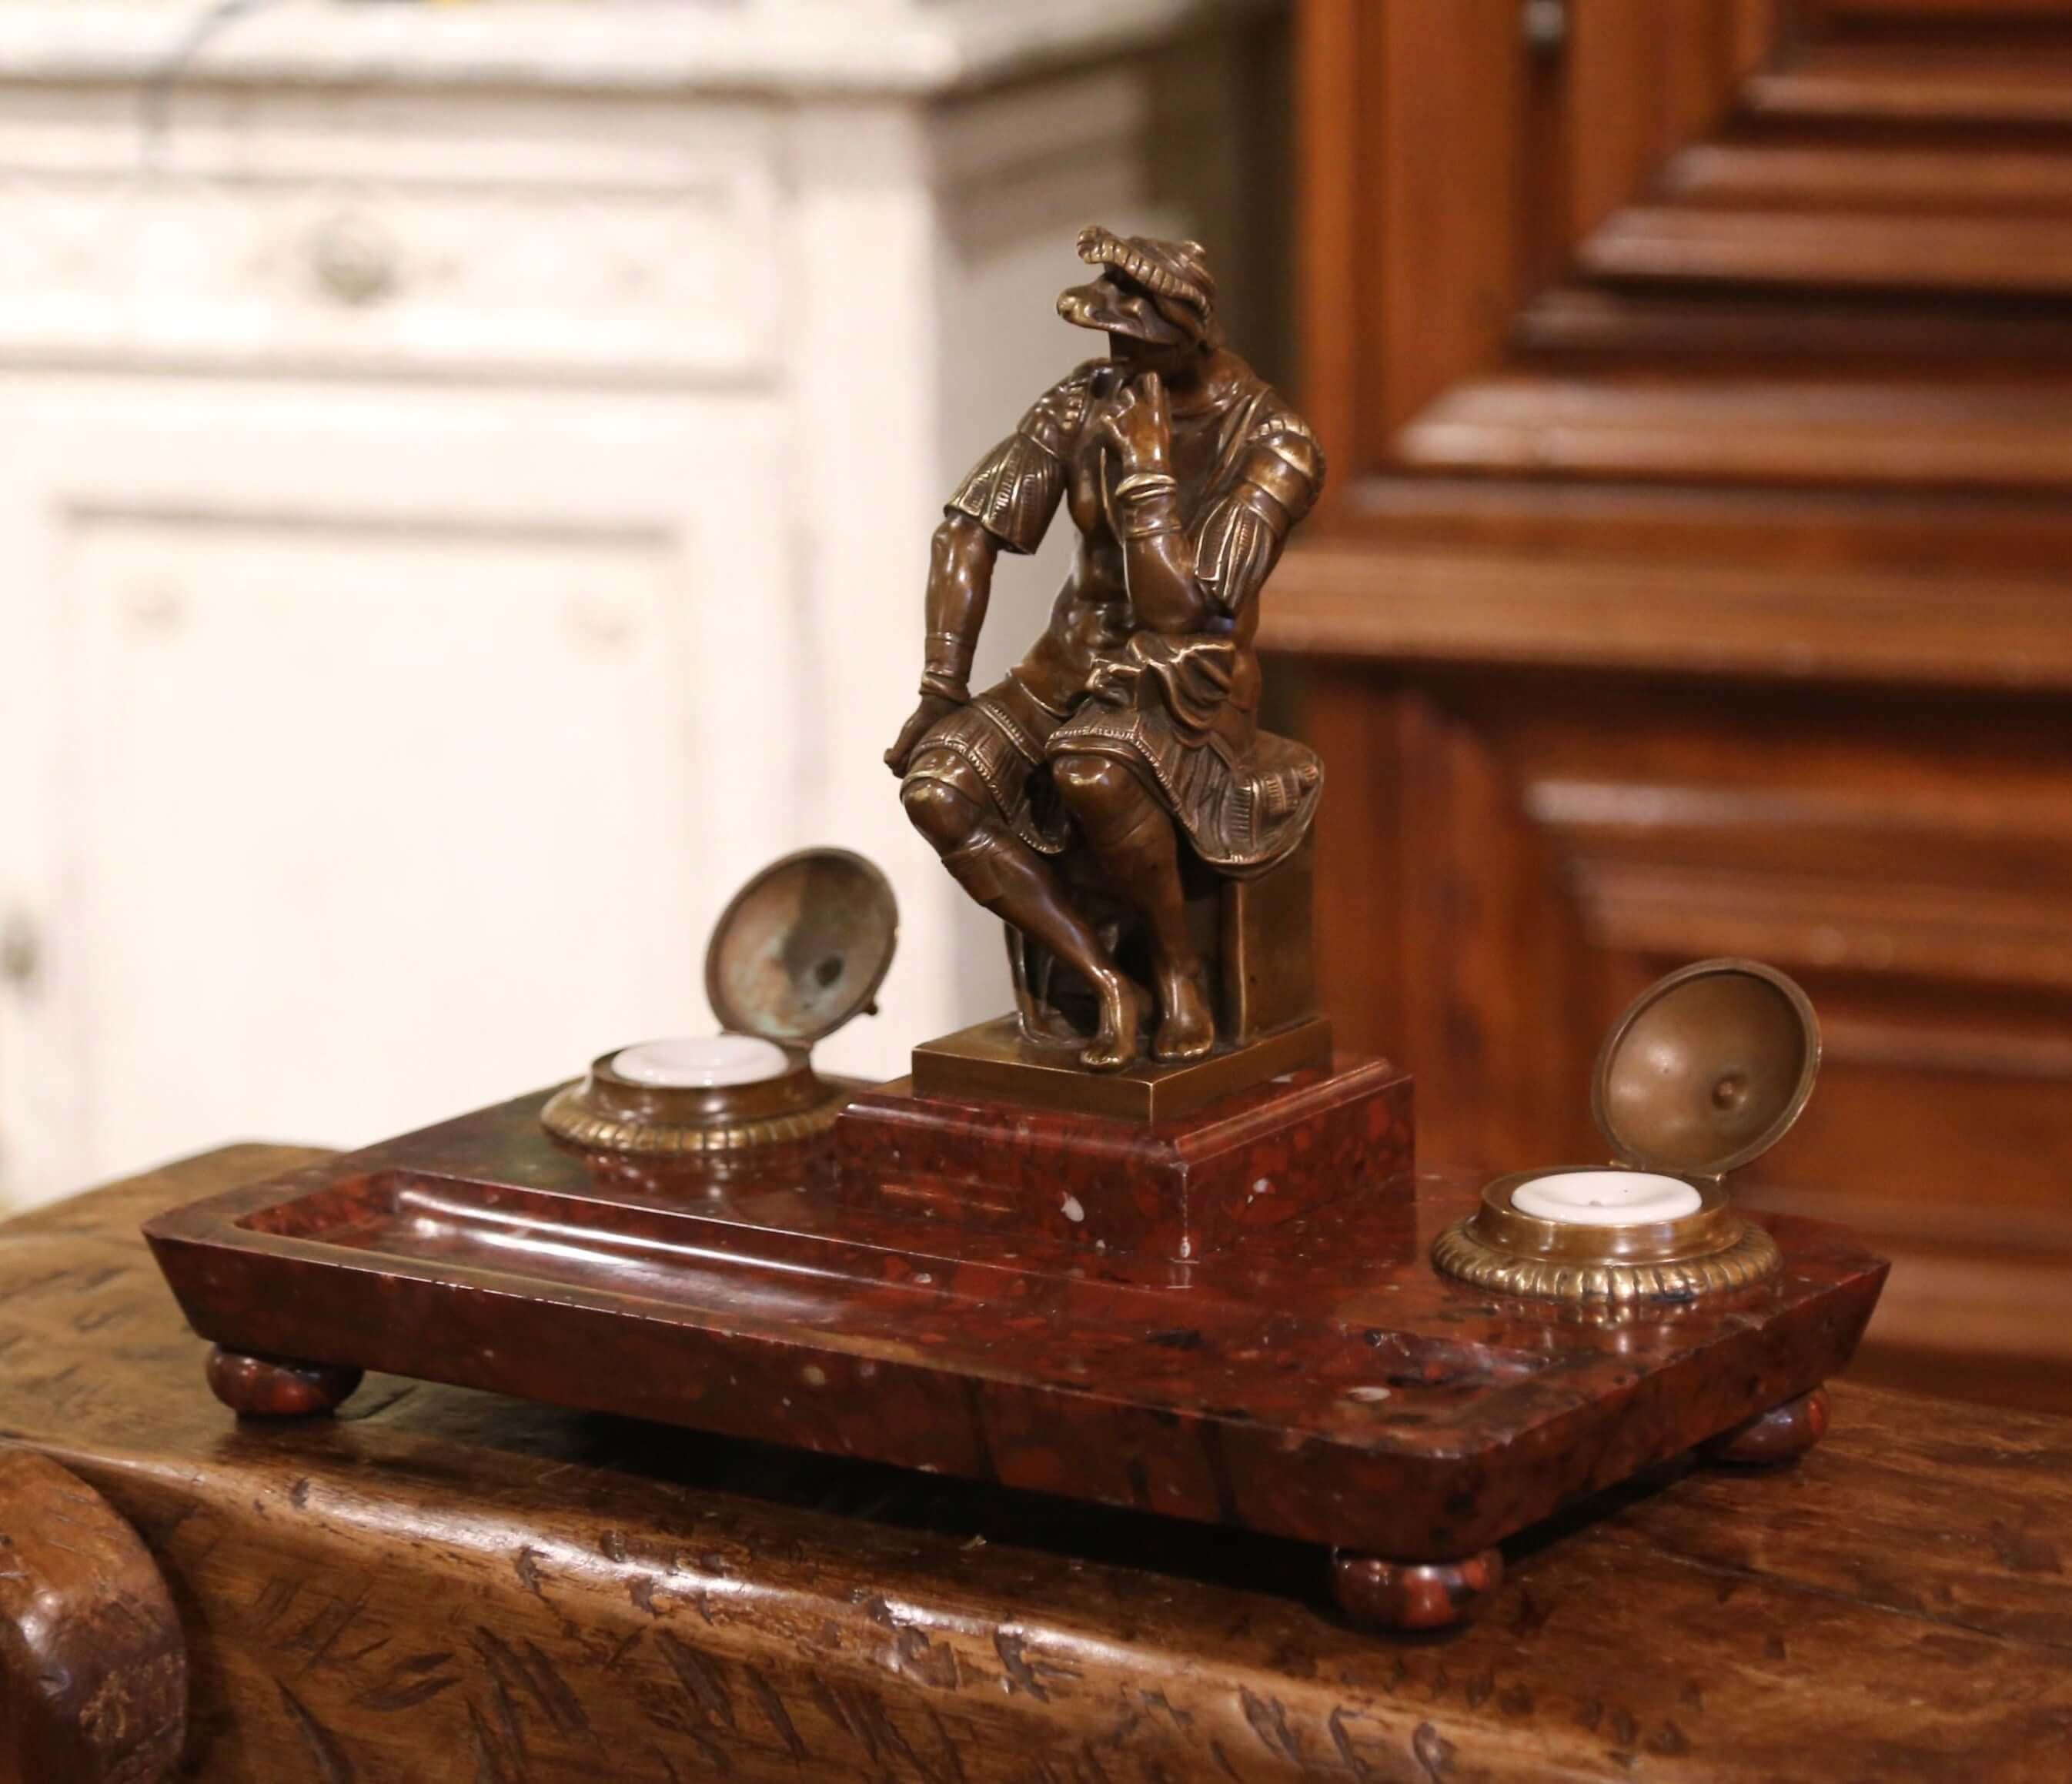 Decorate your office desk with this large Empire style inkwell. Created in France circa 1870 and rectangular in shape, the inkwell features a bronze Roman soldier in the center sitting on a stool. On either side of the figure, are two bronze